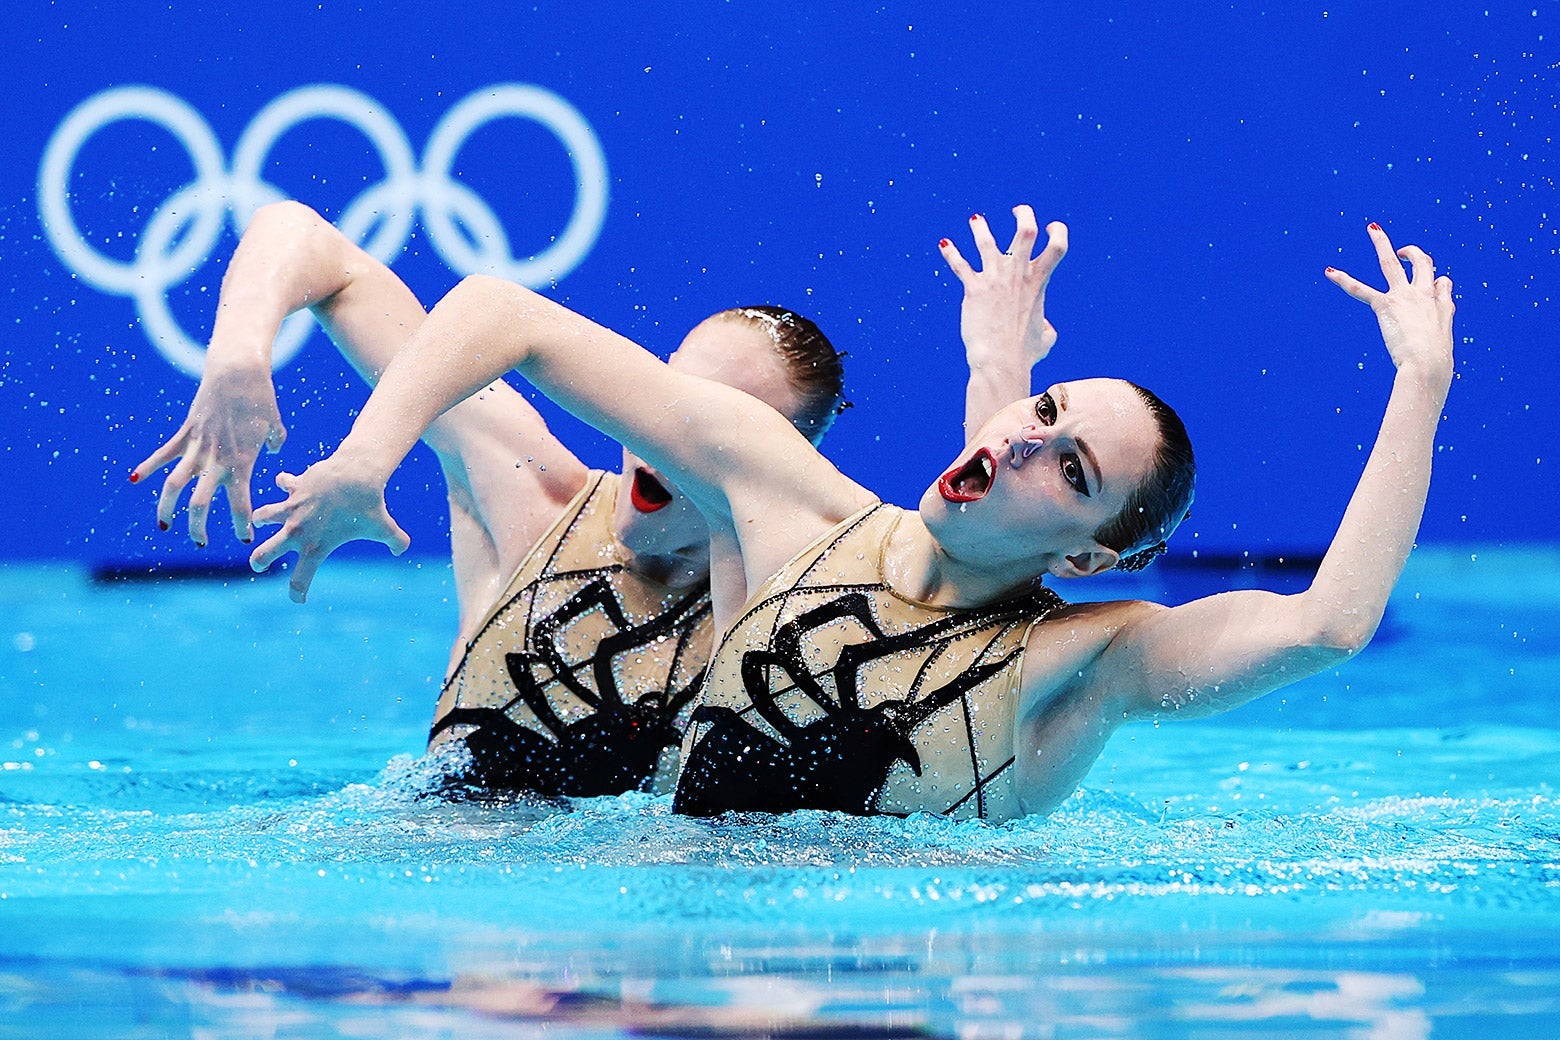 Two women, wearing bedazzled suits with giant spiders on them, raise their arms in the air as they swim in a pool.